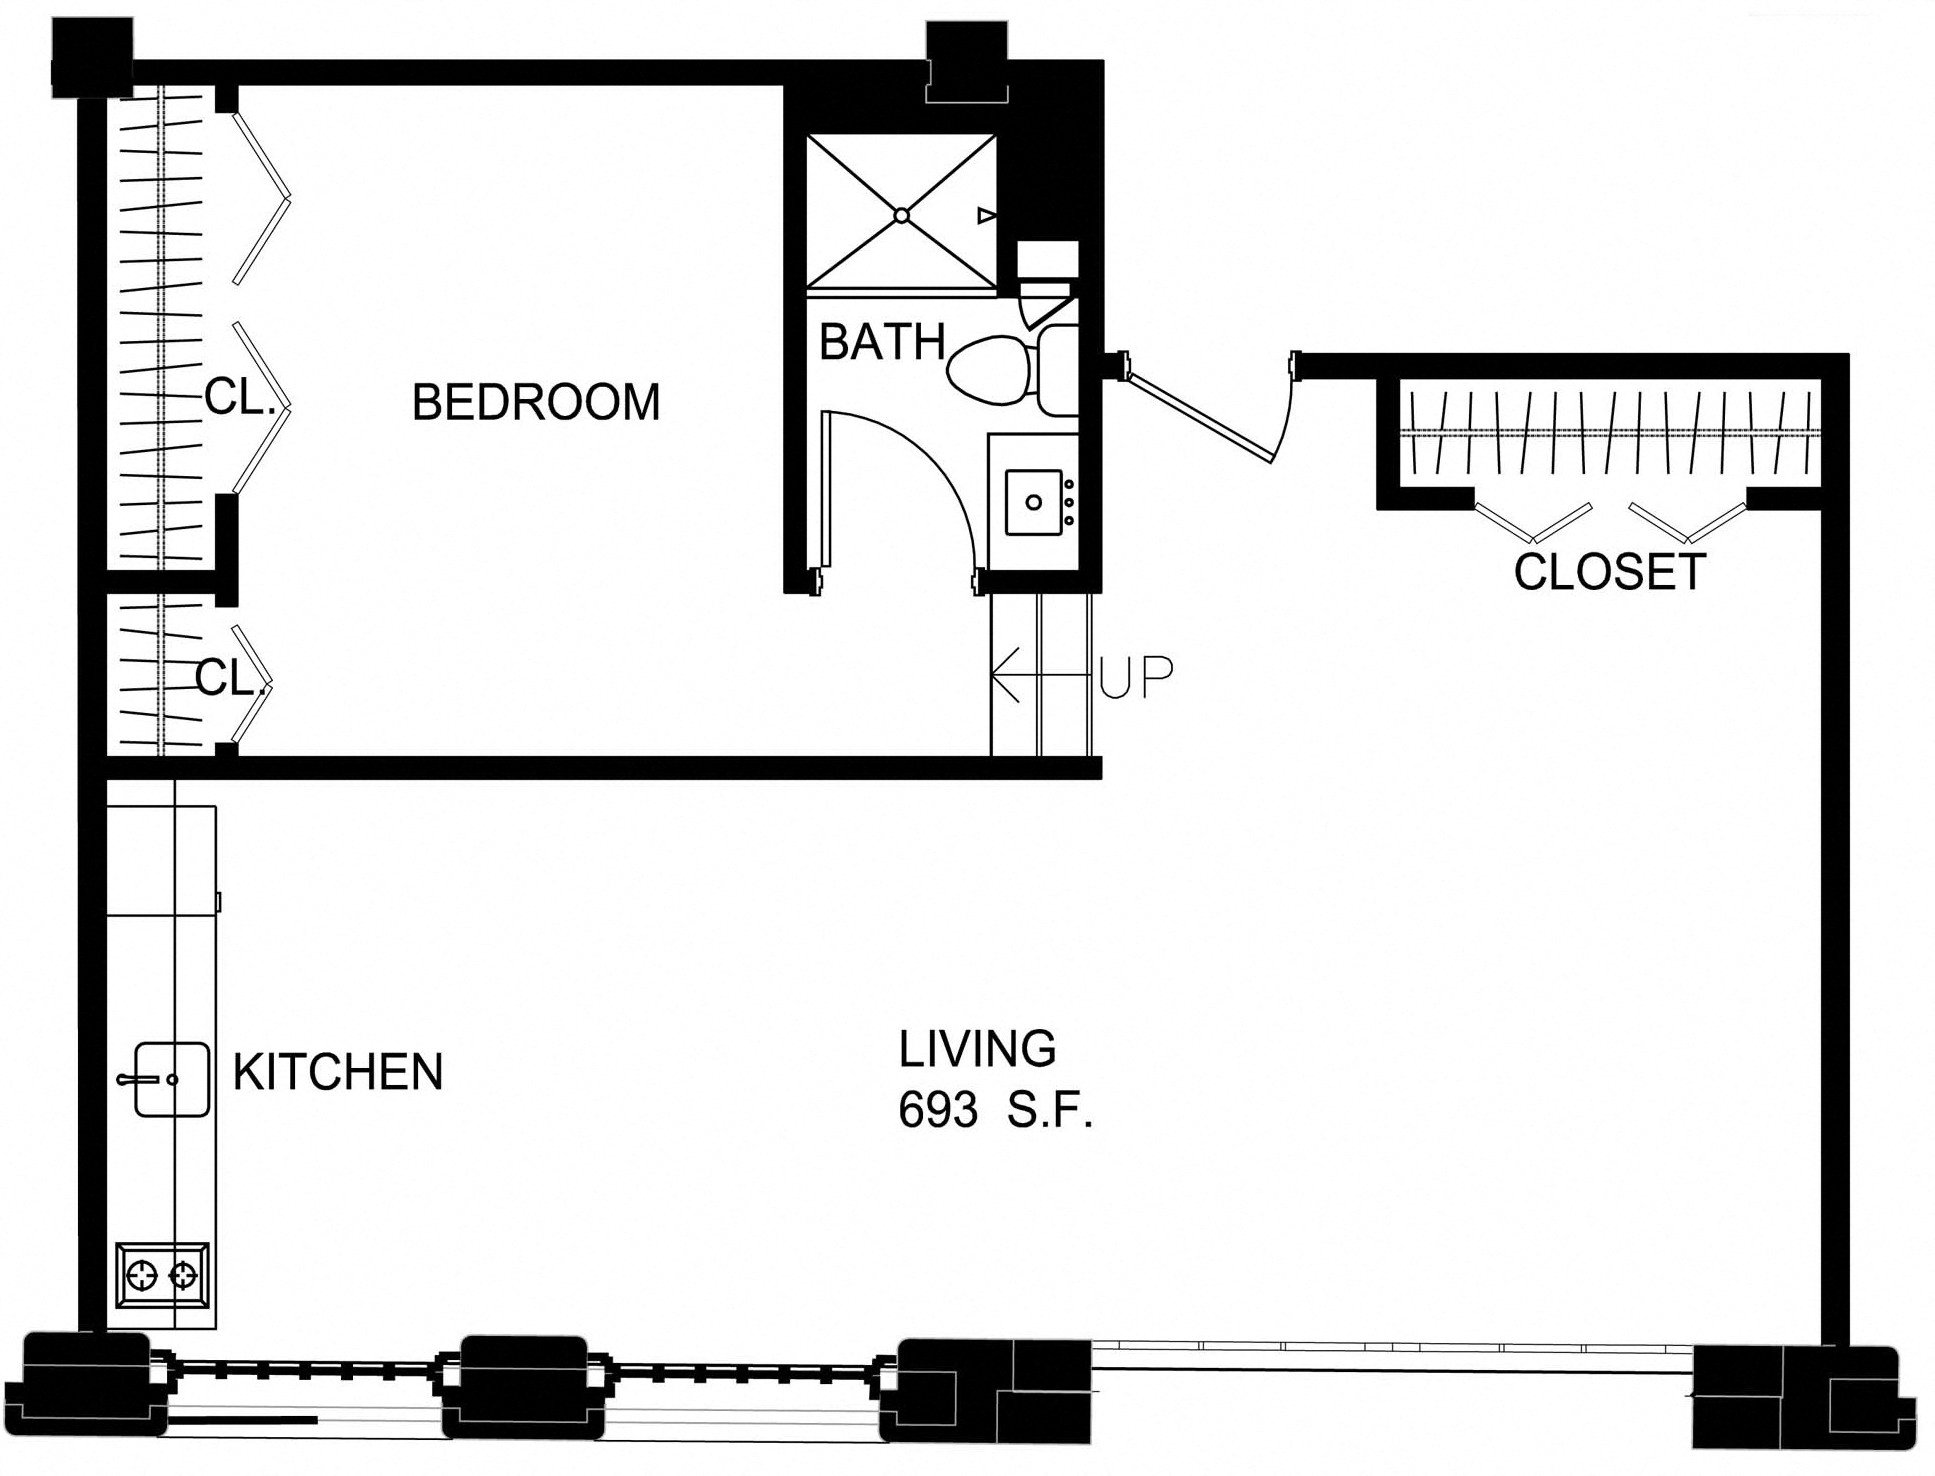 Floorplan for Apartment #S2125, 0 bedroom unit at Halstead Providence